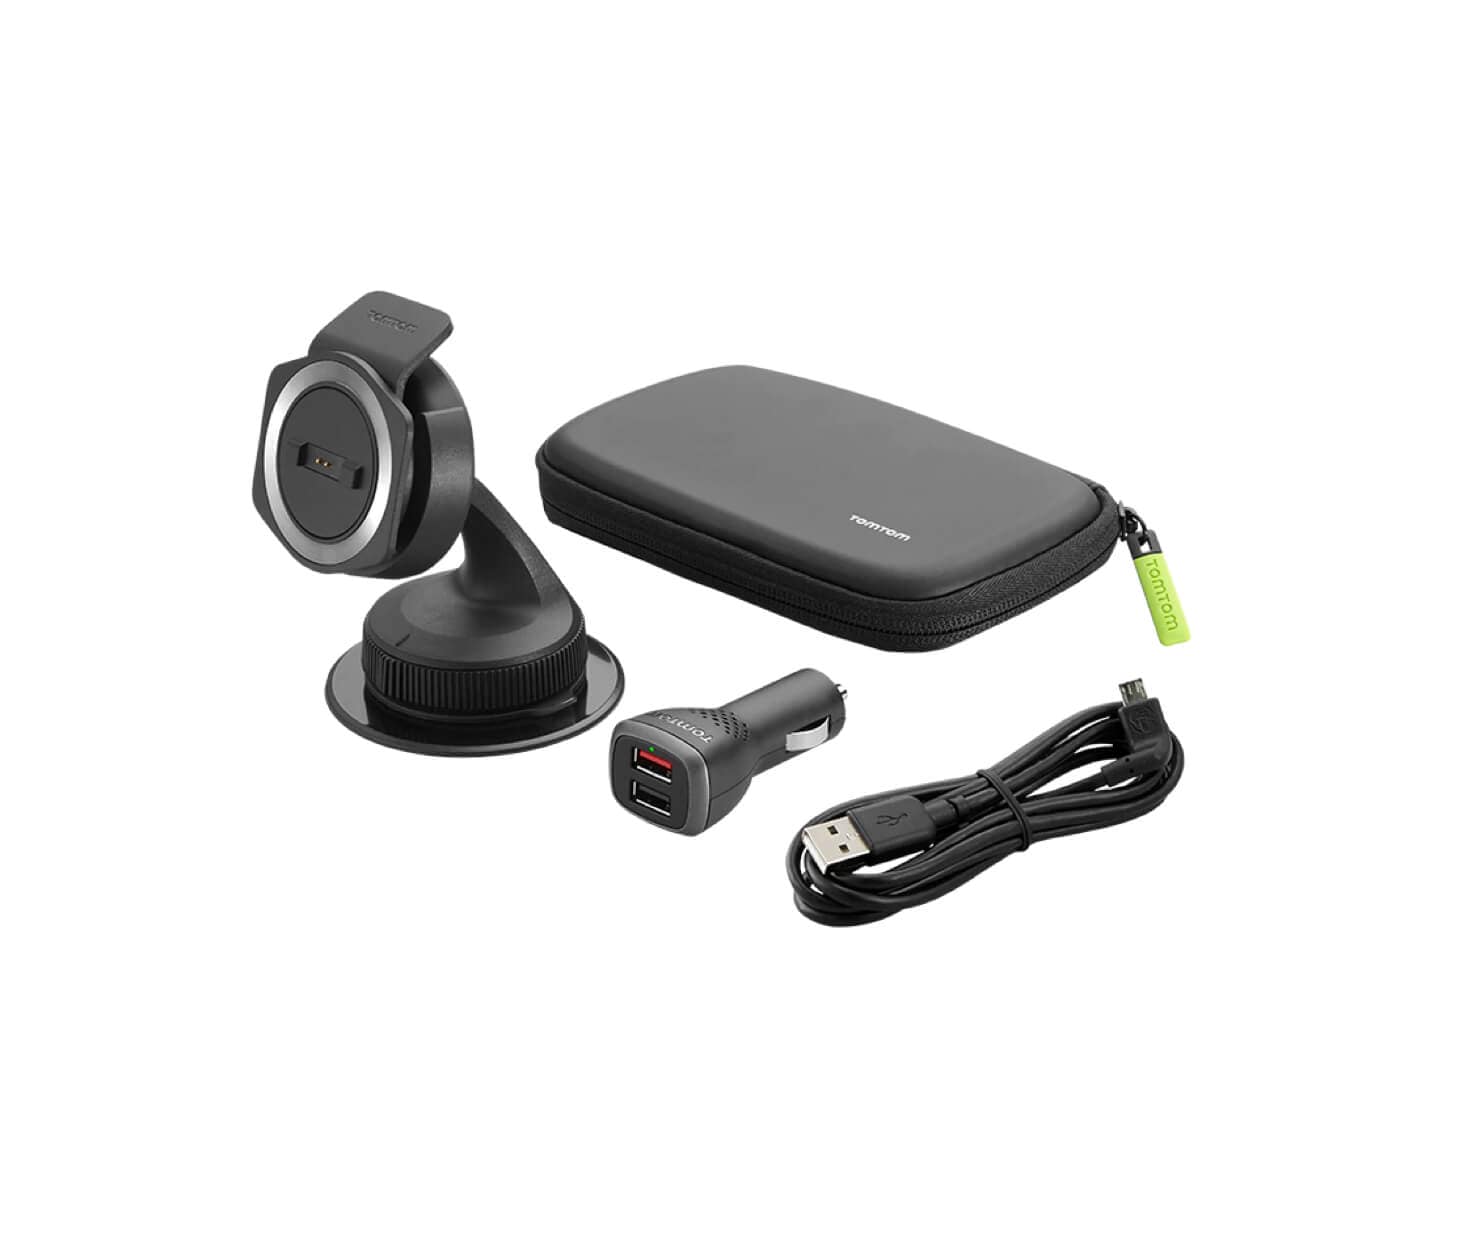 TomTom GPS Accessory